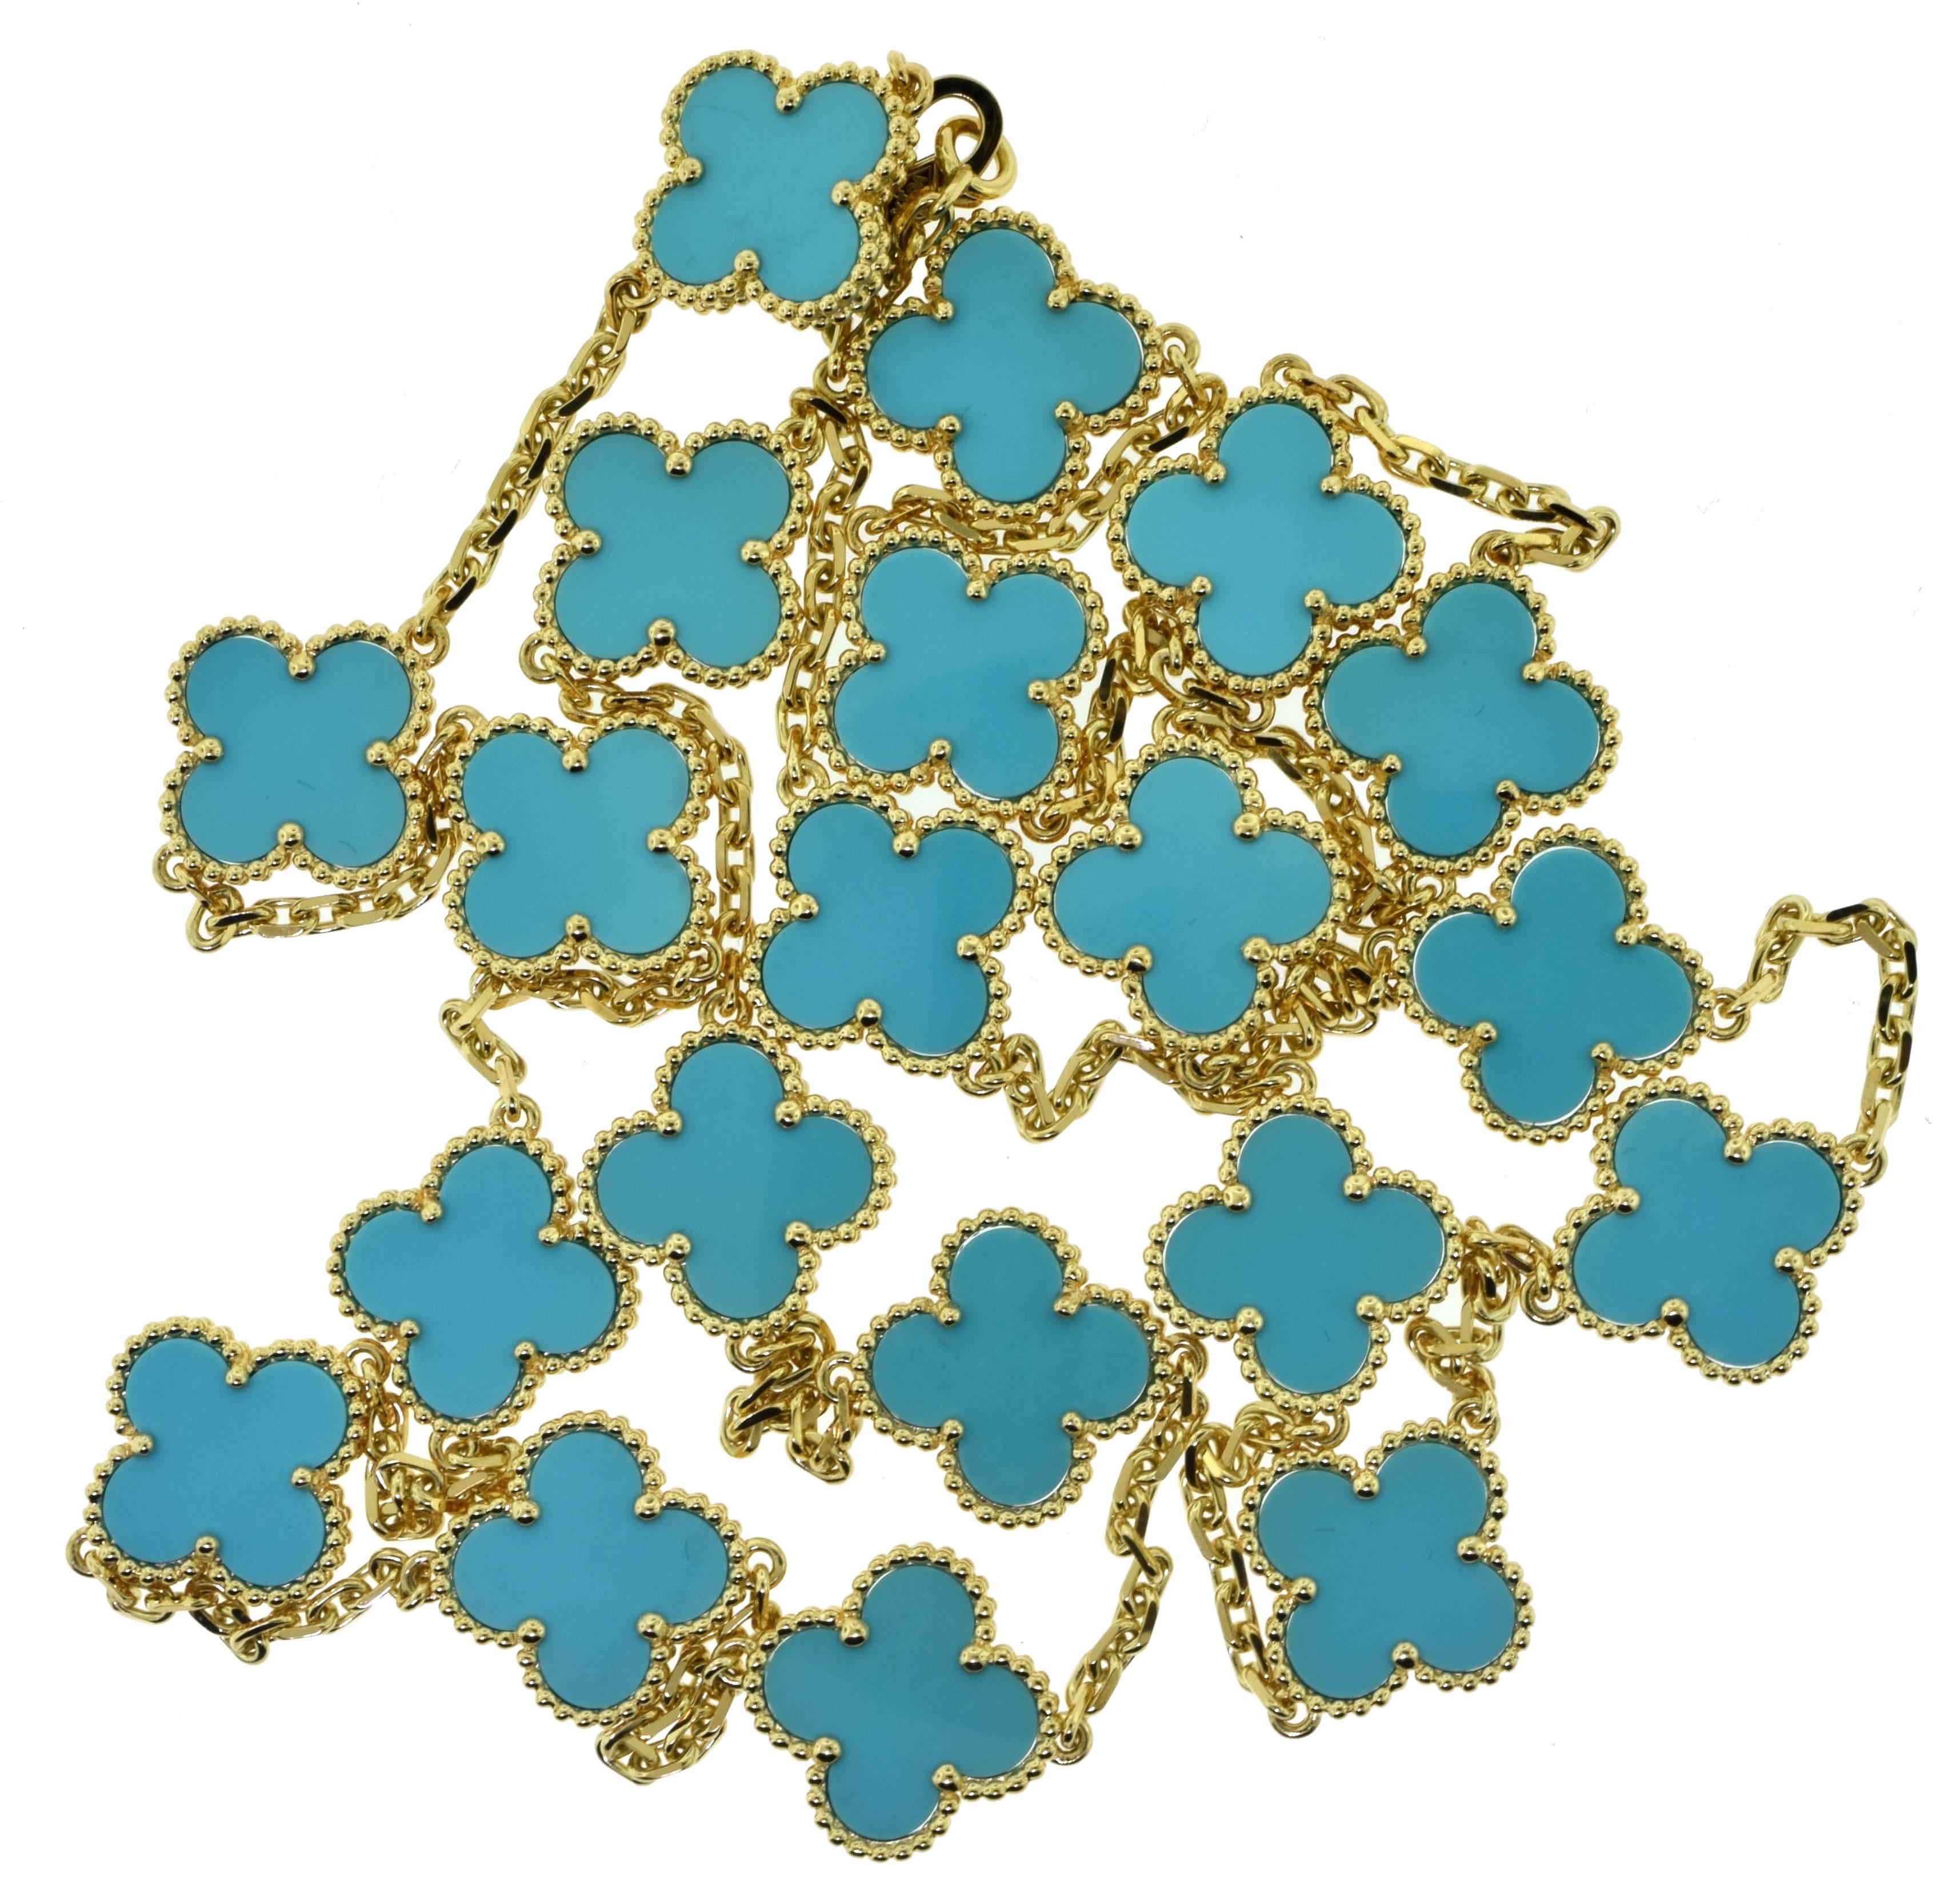 Designer: Van Cleef & Arpels
Collection: Vintage Alhambra
Metal: Yellow Gold
Metal Purity: 18k
Stones: Turquoise
Total Item Weight (grams): 41.0 
Total Chain Length: 31 inches
Clasp: Lobster
Includes: VCA Paperwork (please see photos)